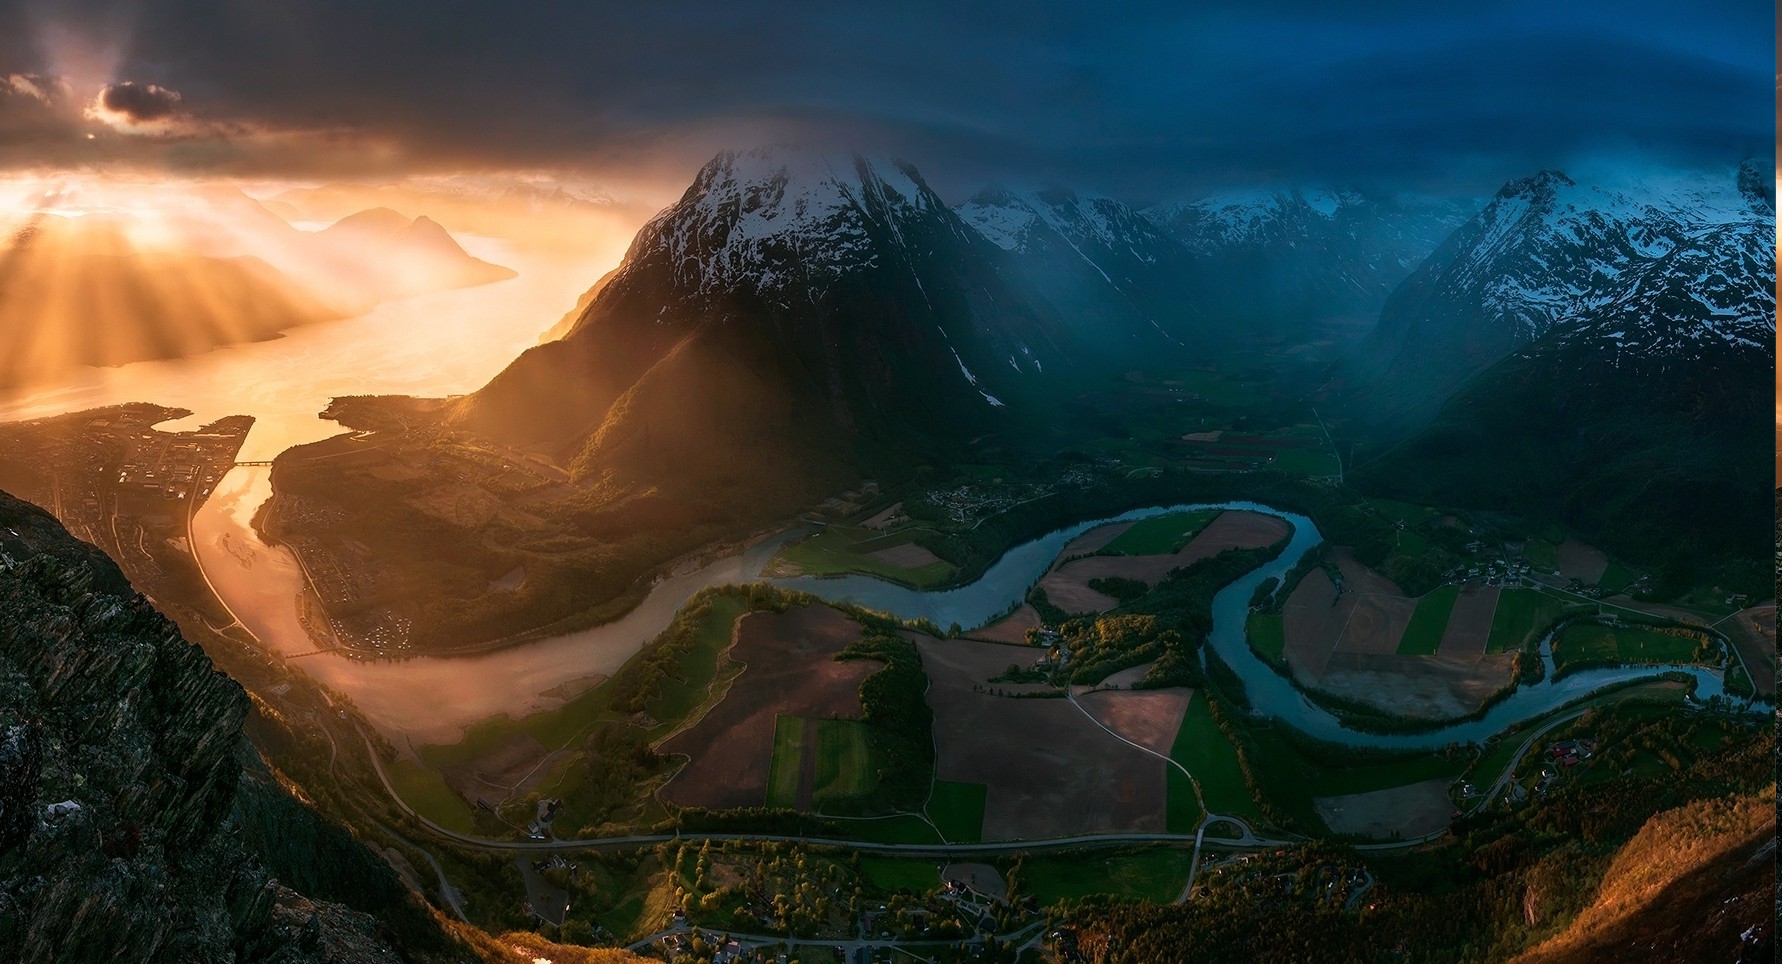 sunset, Norway, Field, Road, Mountain, Clouds, Sun Rays, Town, Snowy Peak, Bay, Valley, Nature, Landscape, River Wallpaper